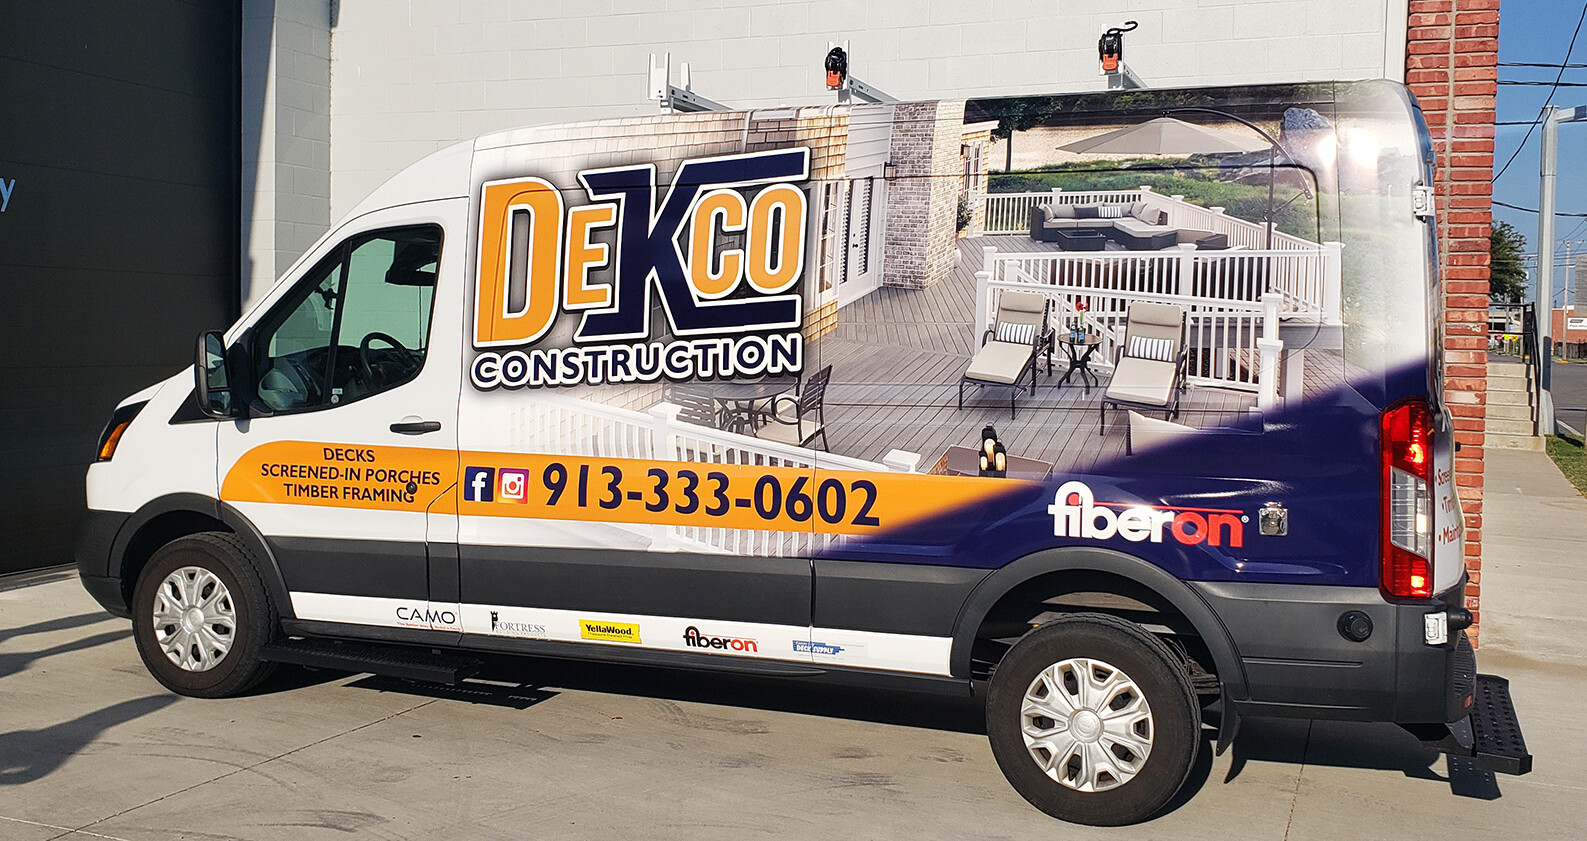 Get Experienced Service with Commercial Vehicle Wraps from Streamline Print and Design.